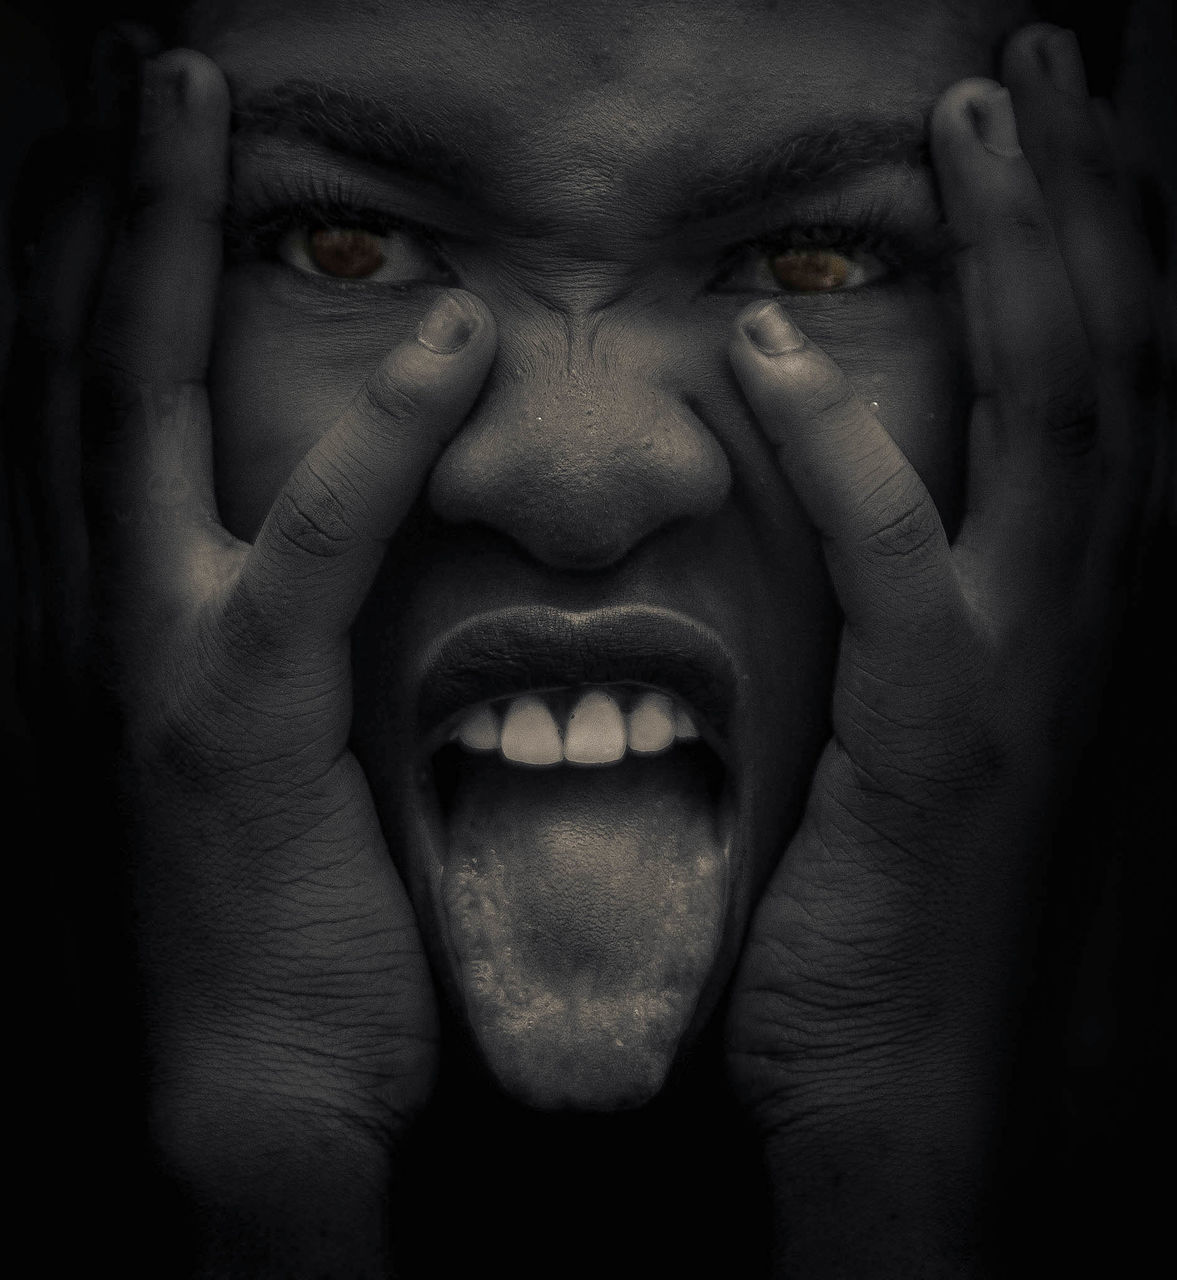 human body part, one person, close-up, portrait, shouting, emotion, aggression, human face, negative emotion, looking at camera, anger, body part, front view, real people, mouth, mouth open, men, fear, hand, frustration, human teeth, black background, digital composite